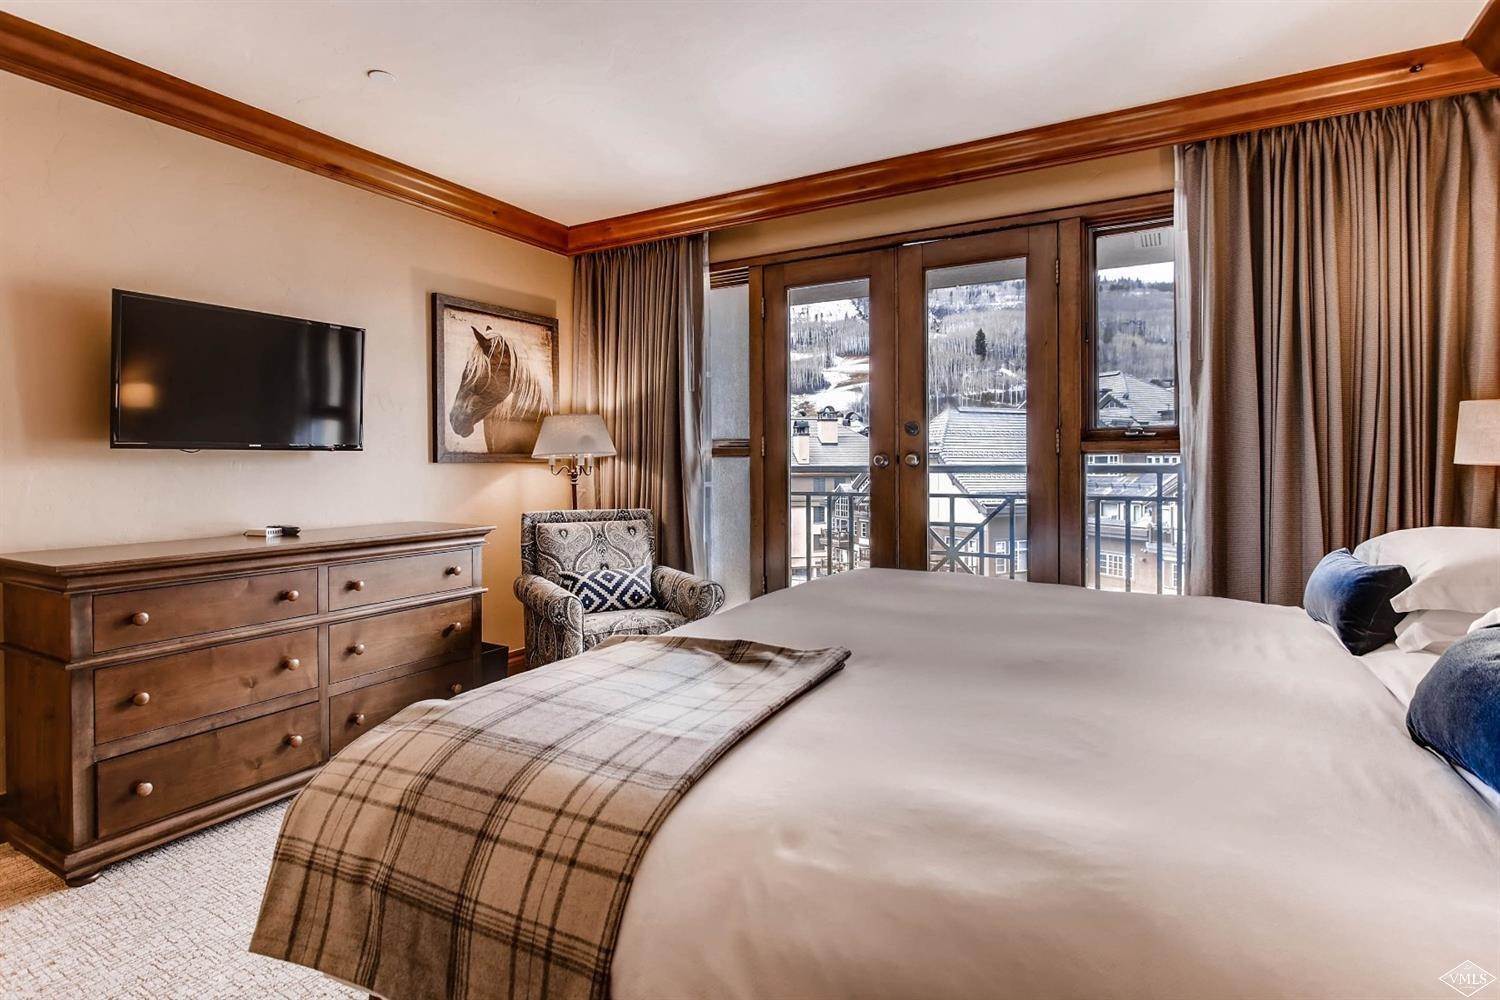 12. fractional ownership prop for Active at 100-Wk 3 Thomas Place Beaver Creek, Colorado 81620 United States